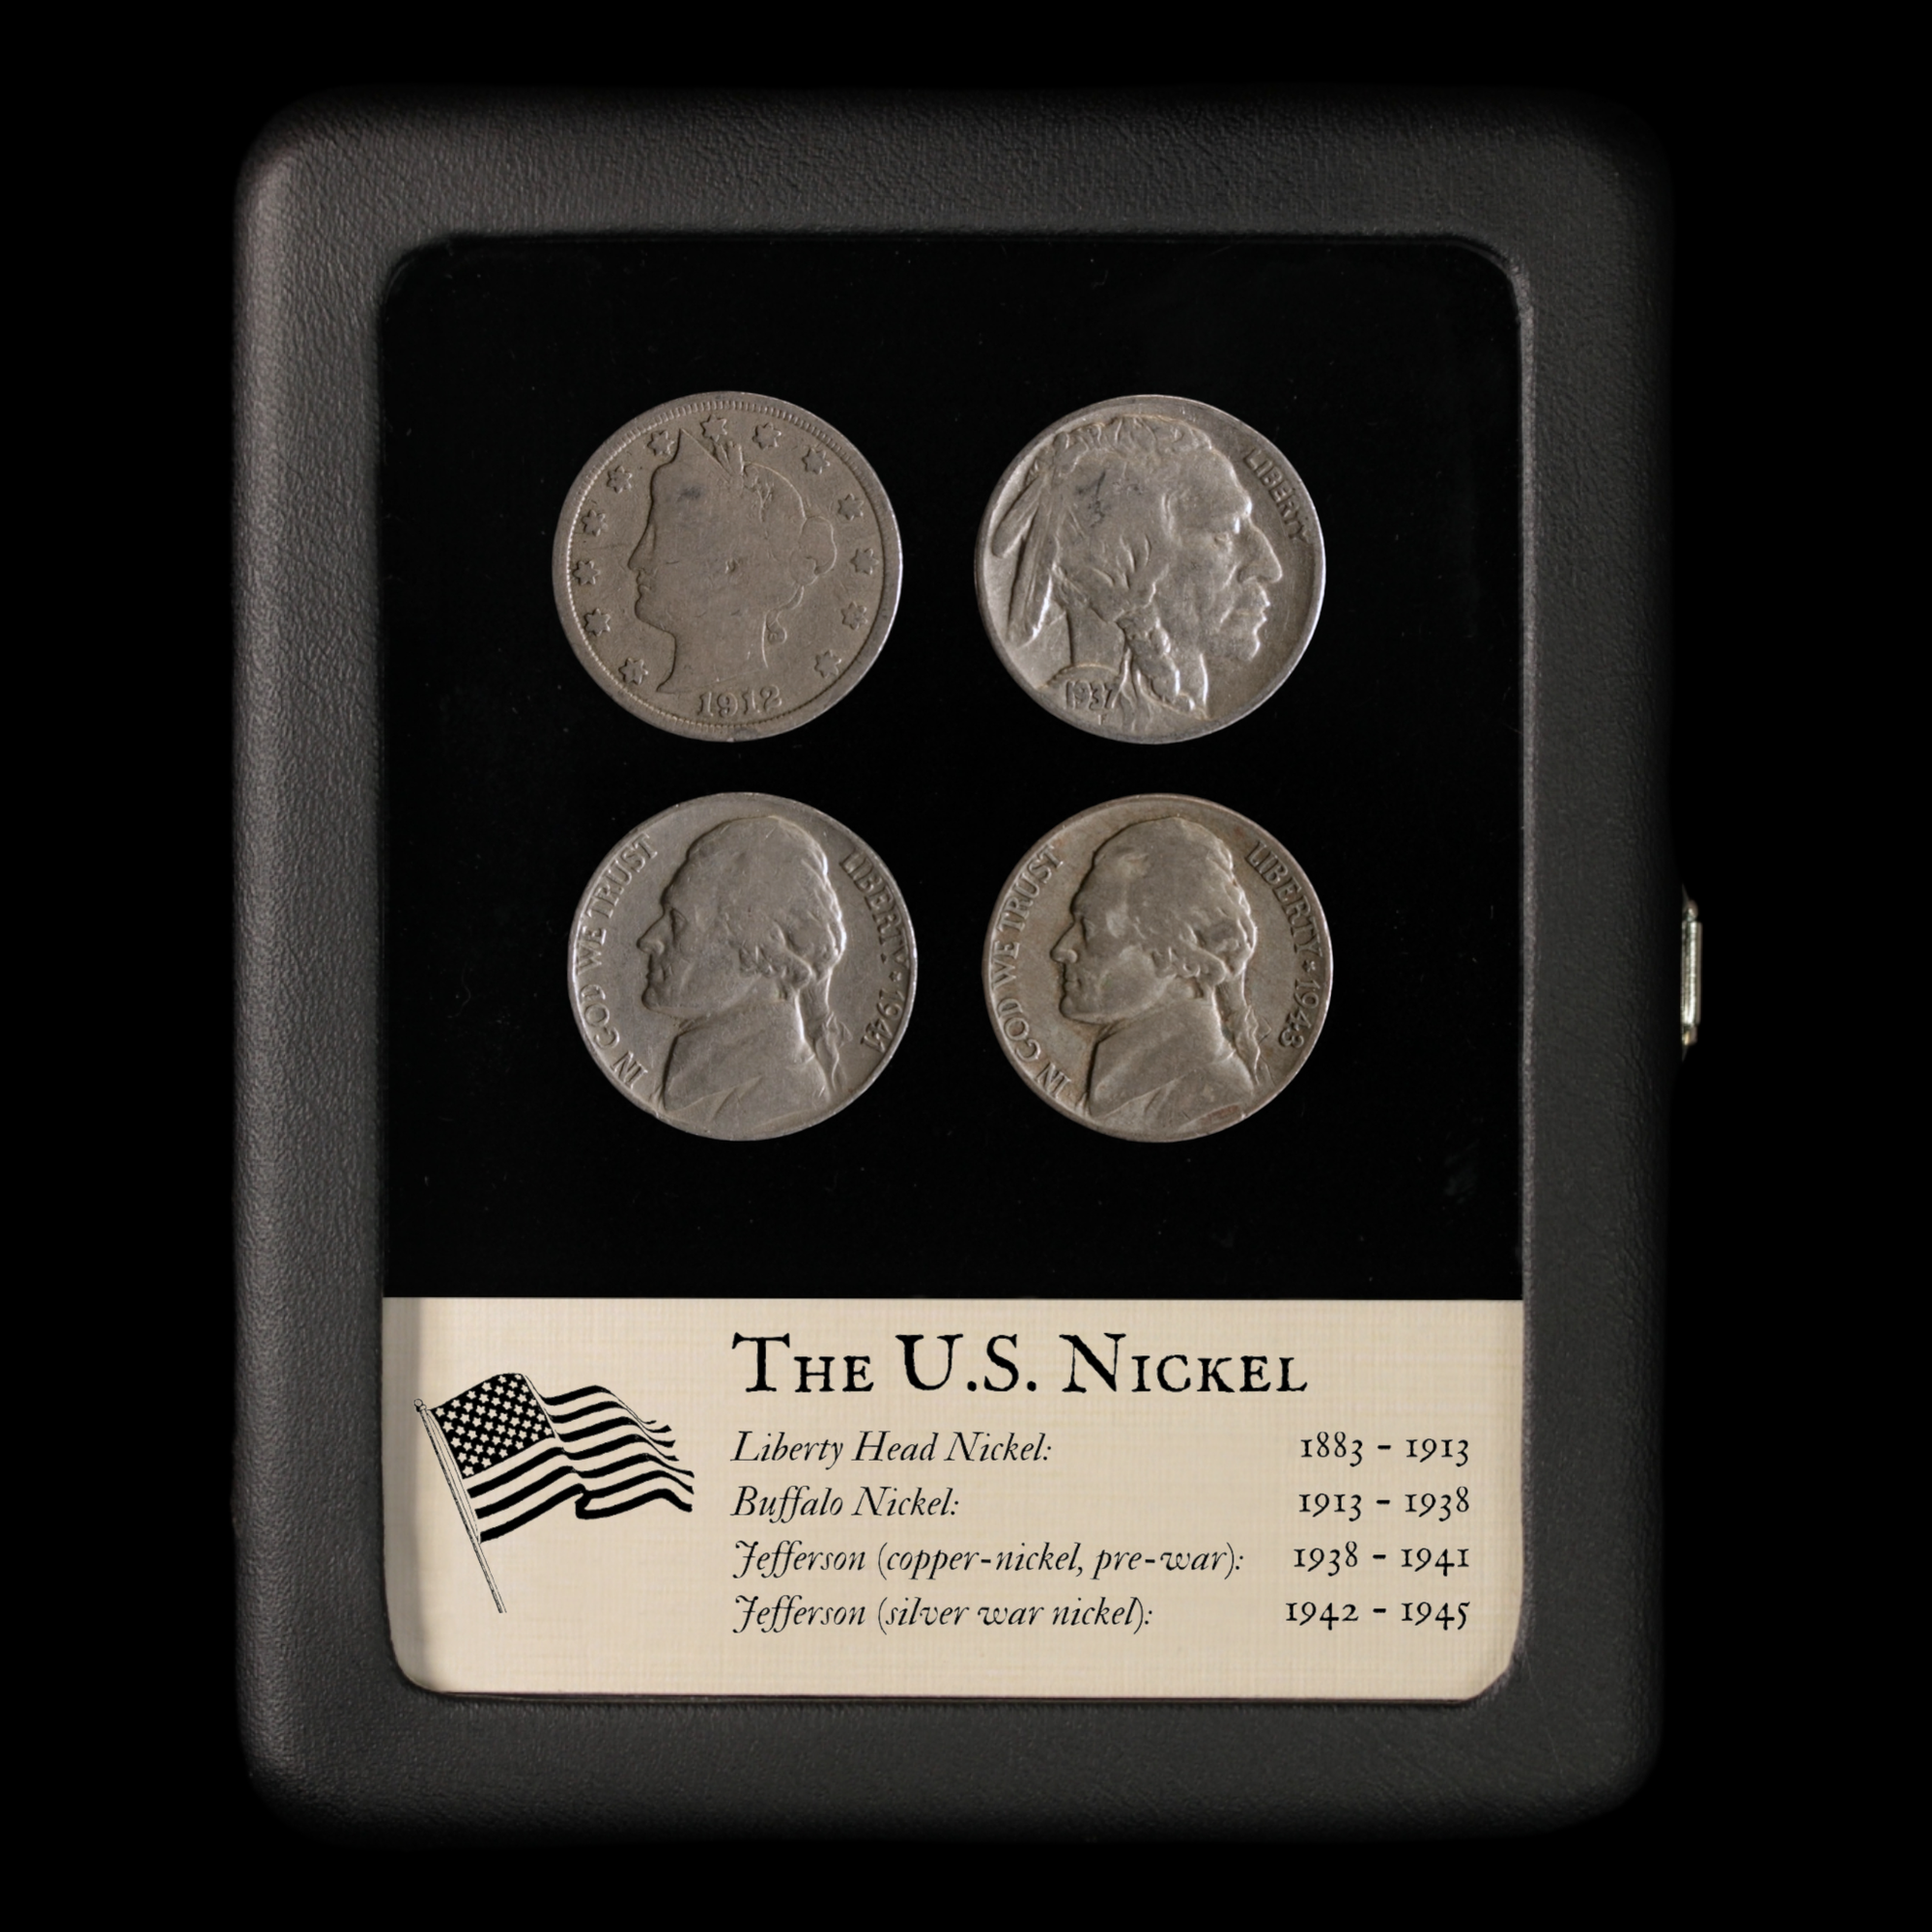 The U.S. Nickel, Four 20th Century Designs - 1883 to 1945 - United States